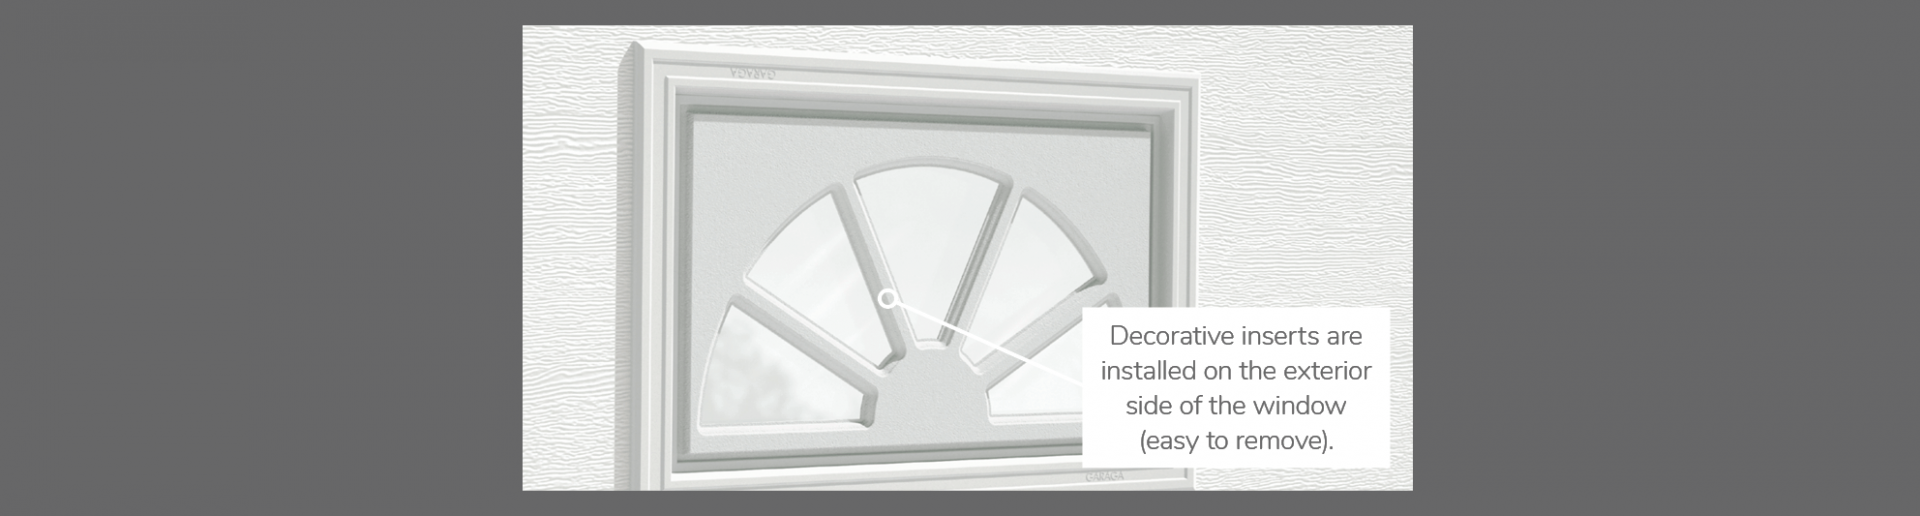 Sherwood Decorative Insert, 21" x 13", available for door R-16